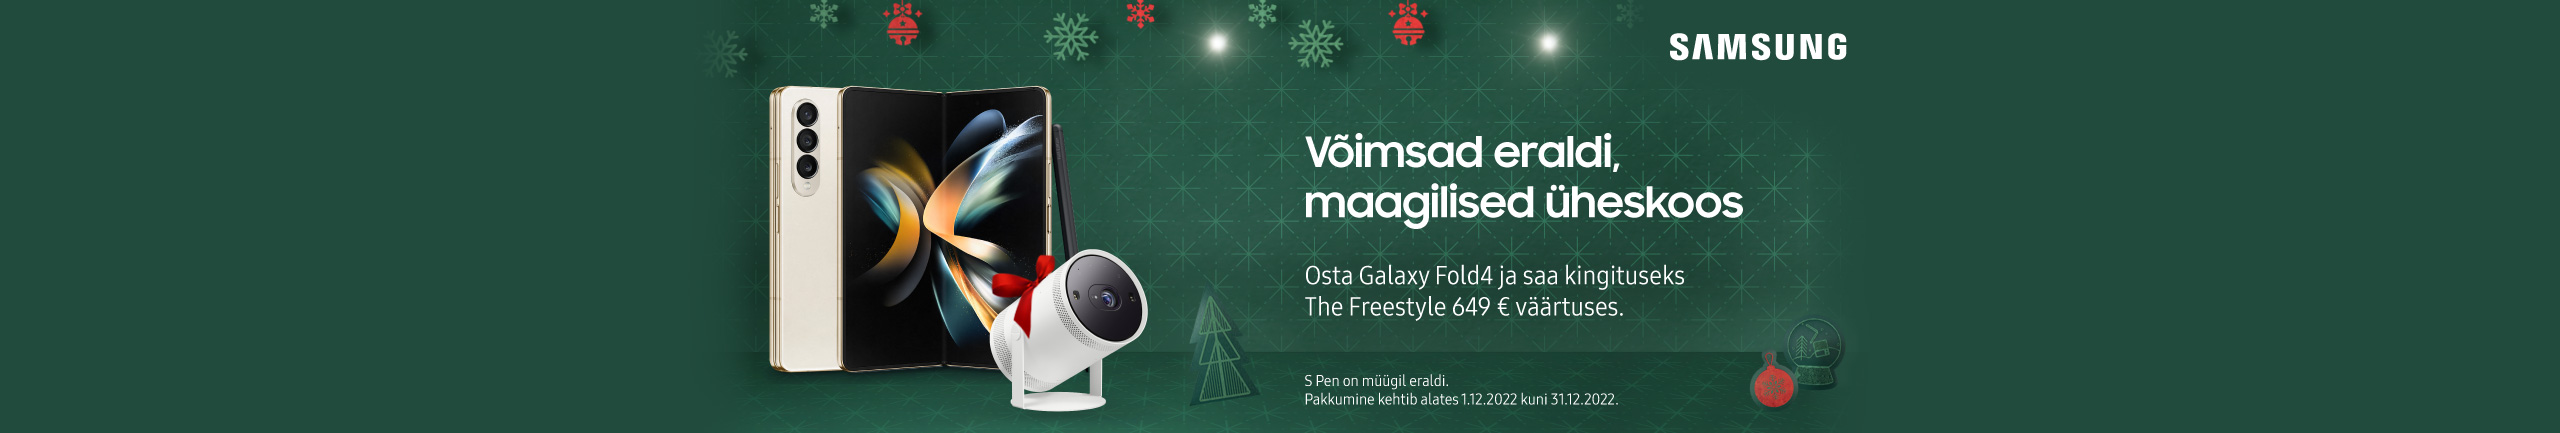 Buy Samsung Galaxy Fold4 and get The Freestyle projector as a complimentary gift!